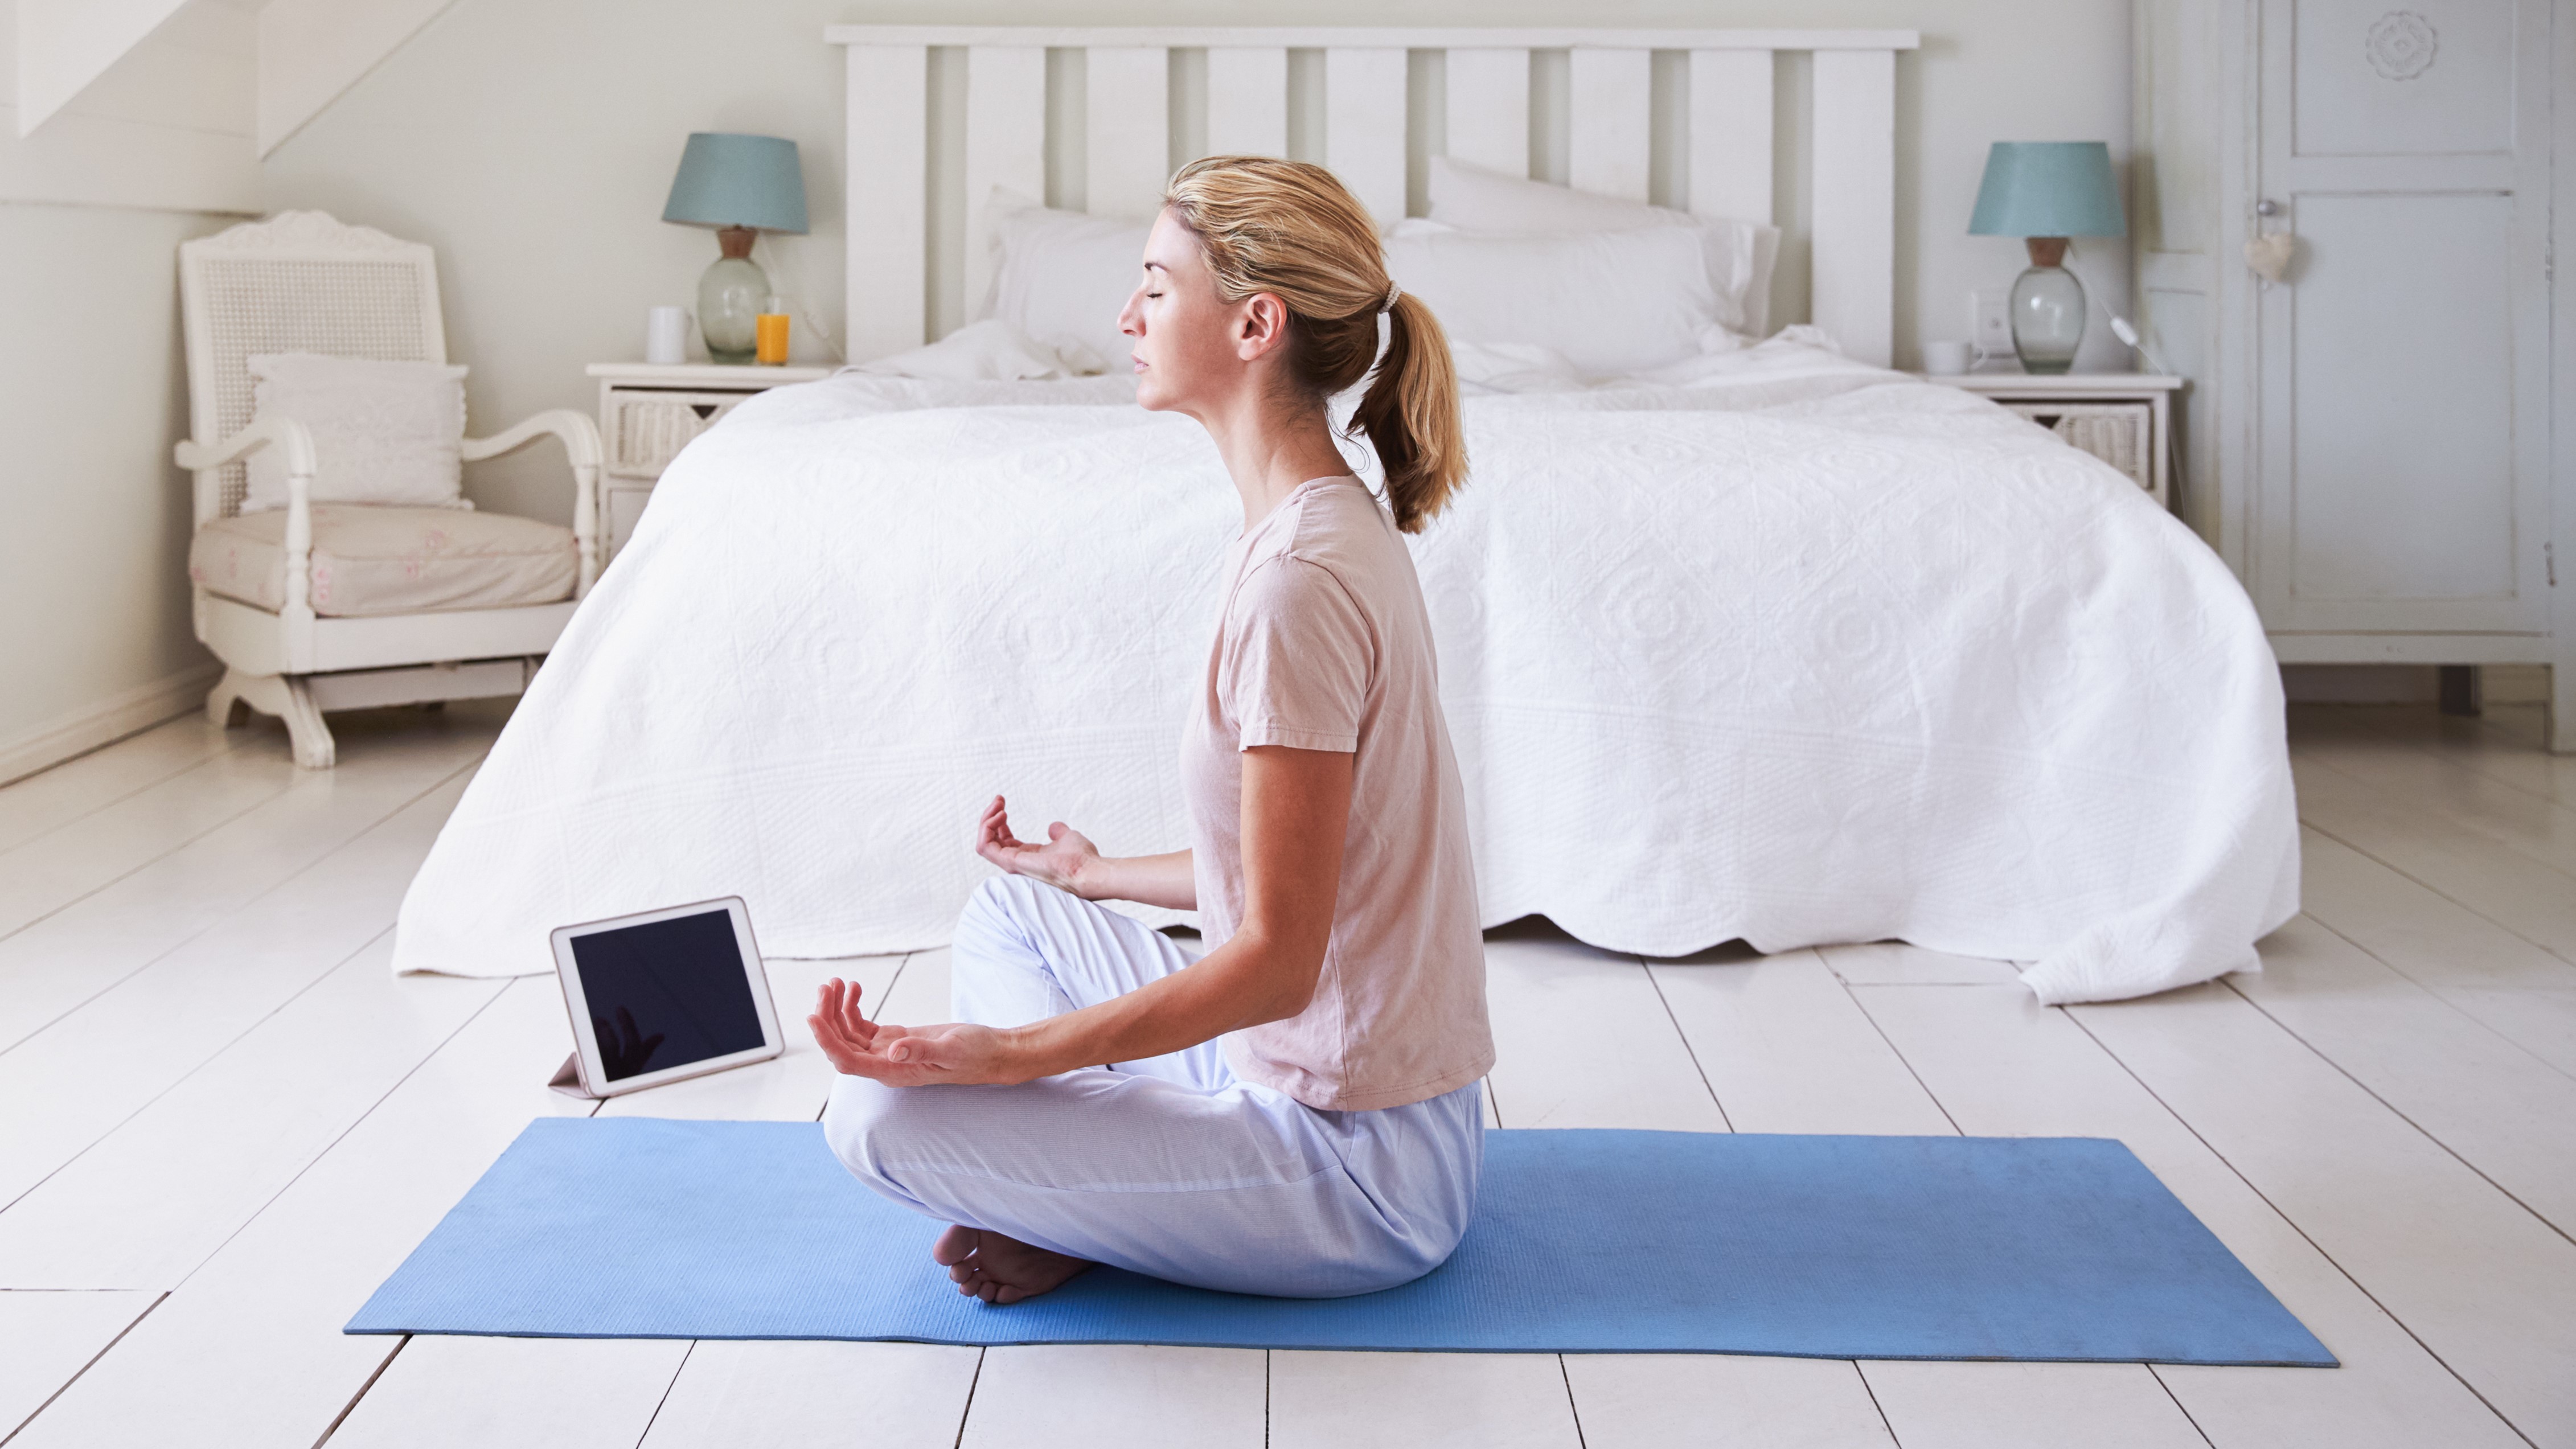 A woman uses a meditation app while sat on a blue yoga mat in front of her white bed